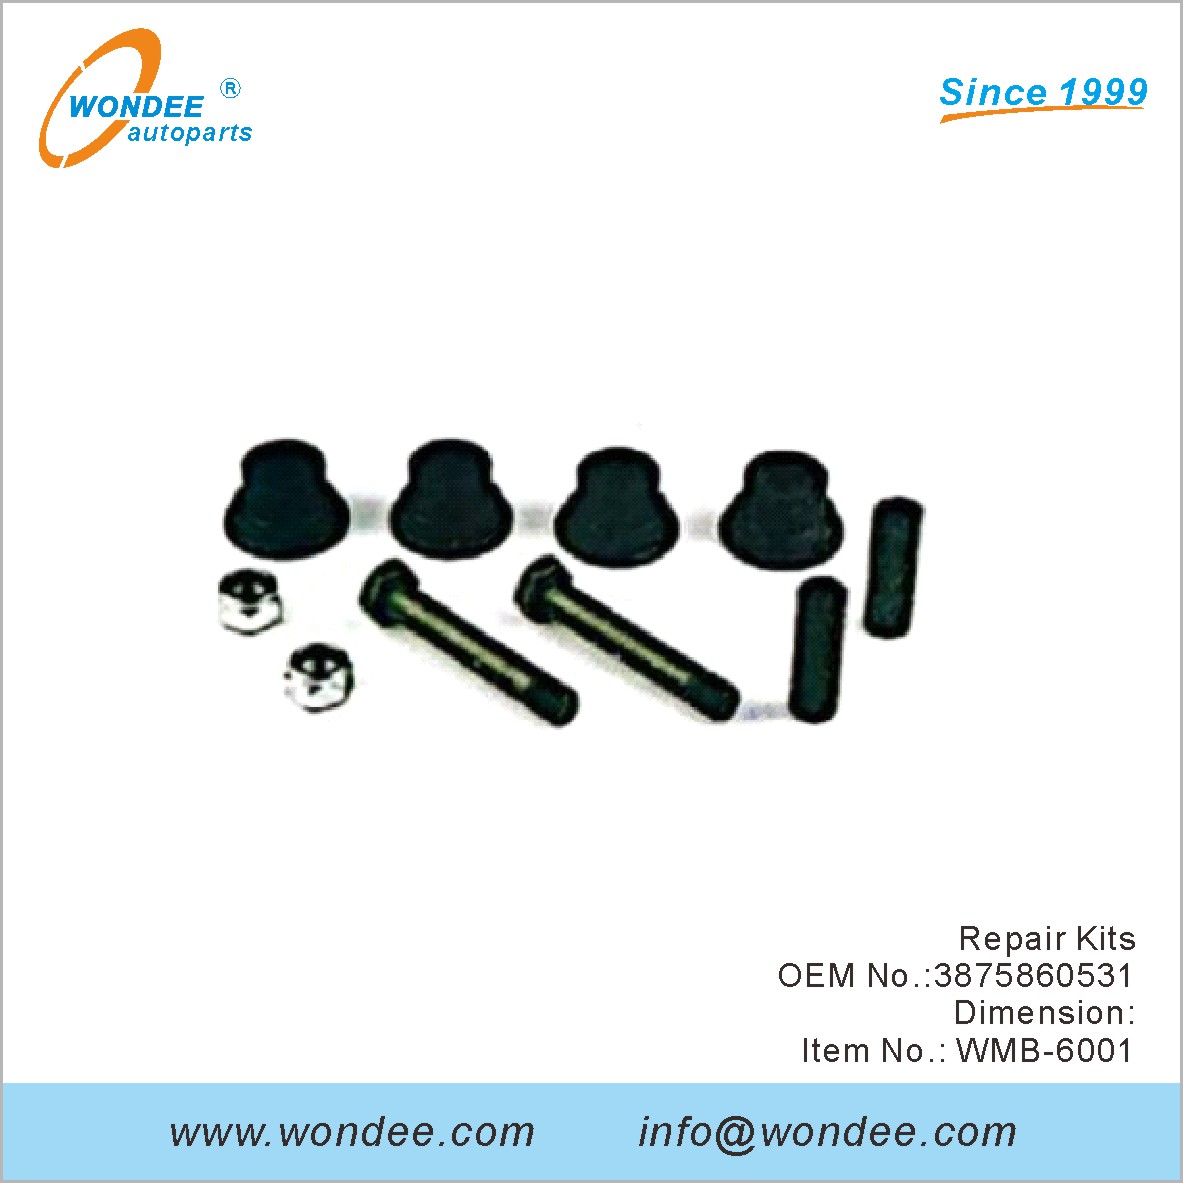 Repair Kits OEM 3875860531 for Benz from WONDEE